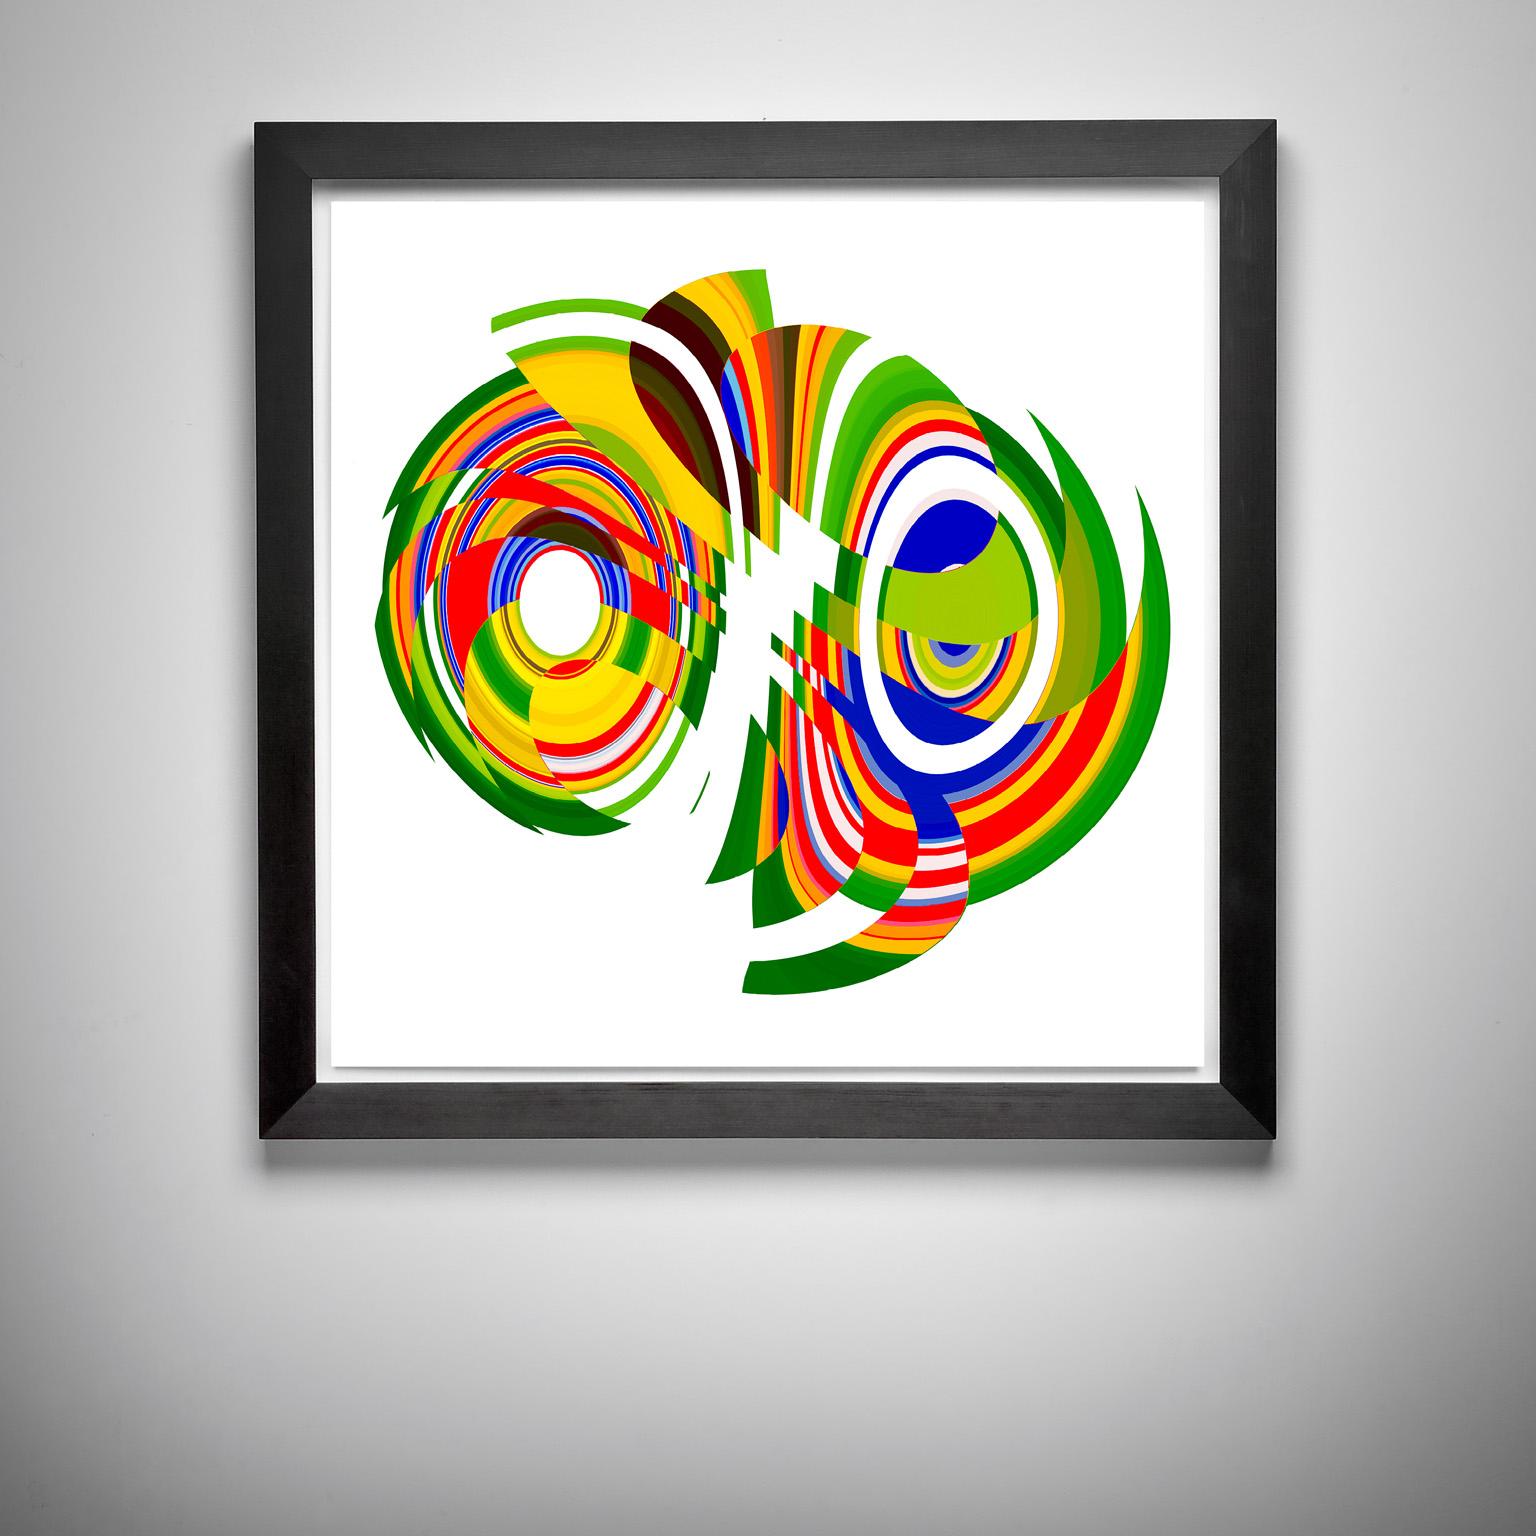 Paul-Émile Rioux Abstract Print - Jelcoba_ Spiral Deconstructed _14, 24 x 24, 1/ 200 ed. (unframed)